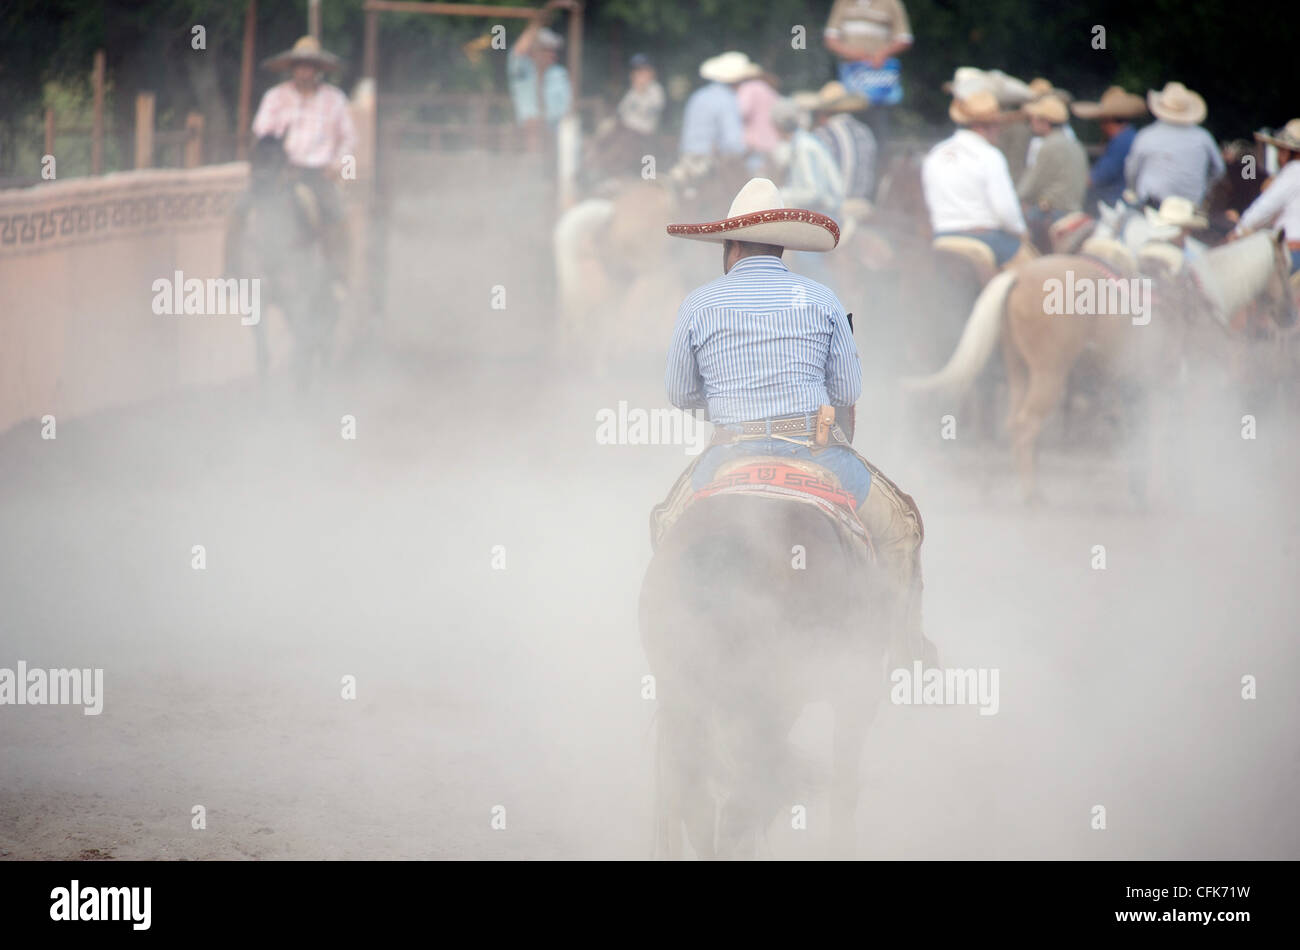 Mexican charros horseman in a break during a coleadero in a dusty lienzo charro (aka arena or ring), San Antonio, TX, US Stock Photo